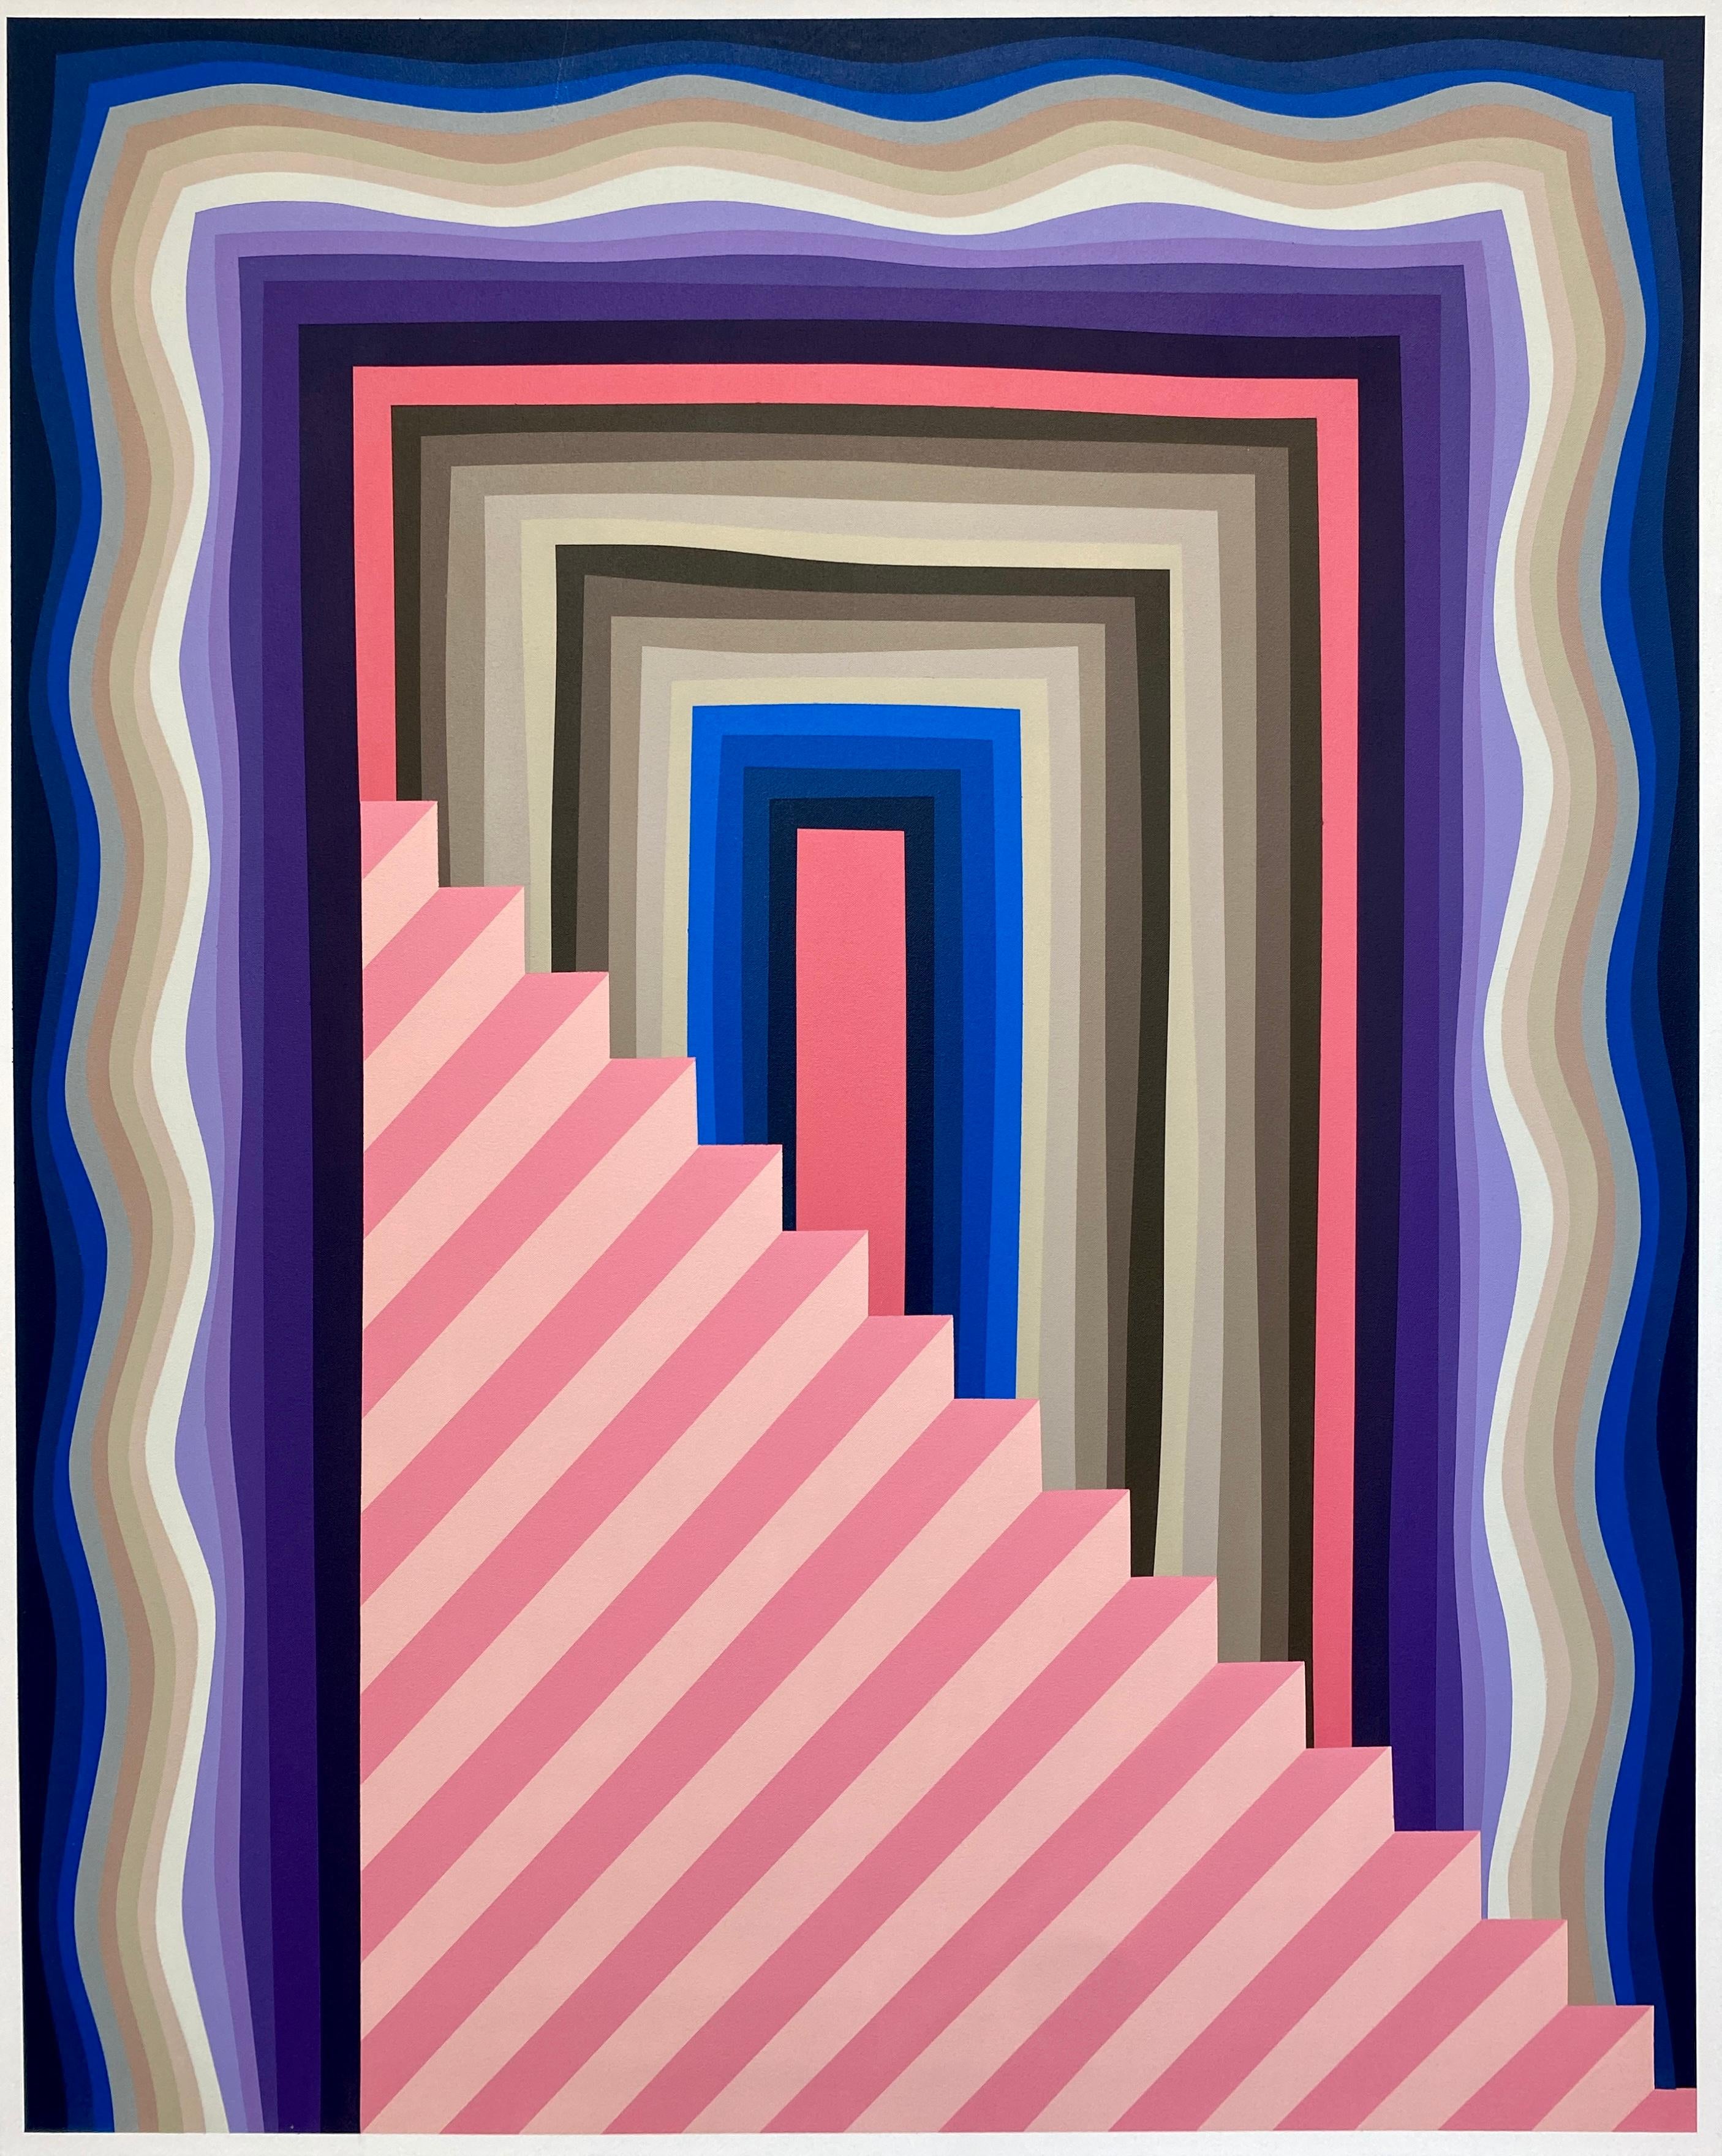 Untitled(Large Wavy Portal Pink Stairs) Contemporary Geometric Abstract Painting